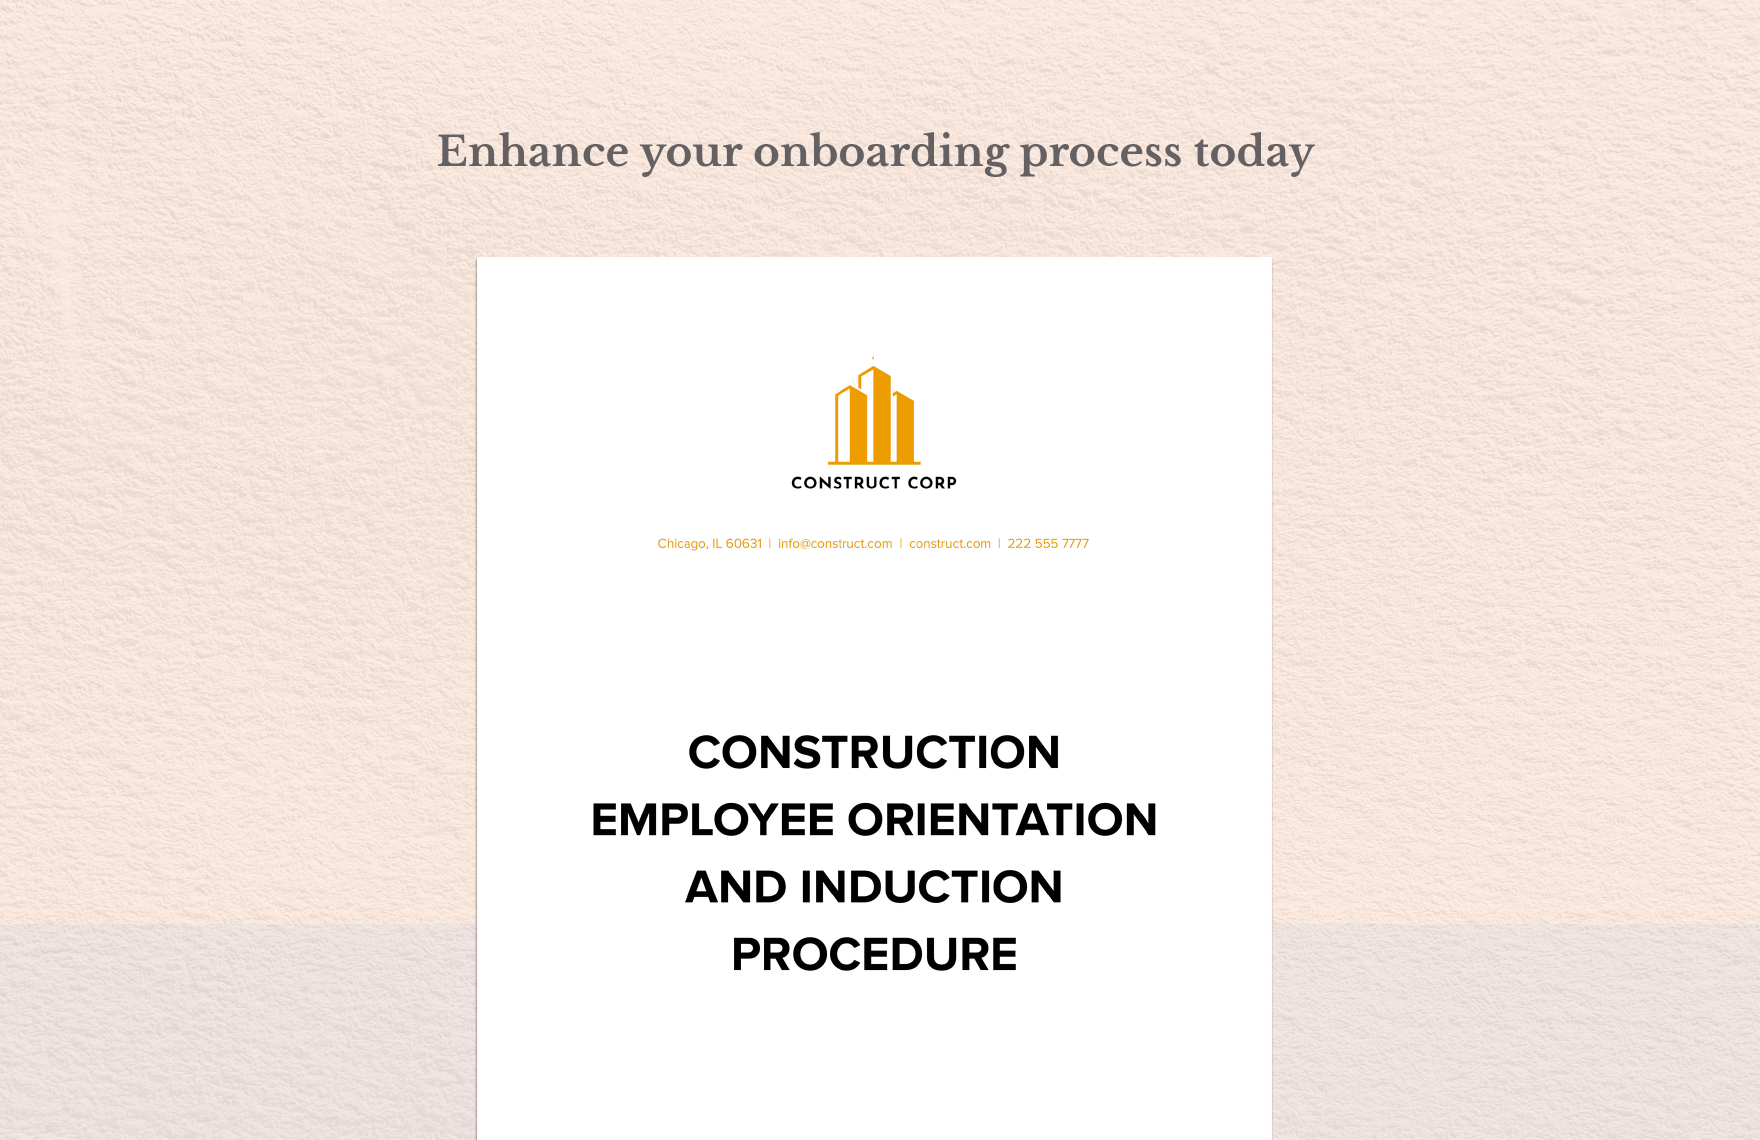 Construction Employee Orientation and Induction Procedure 